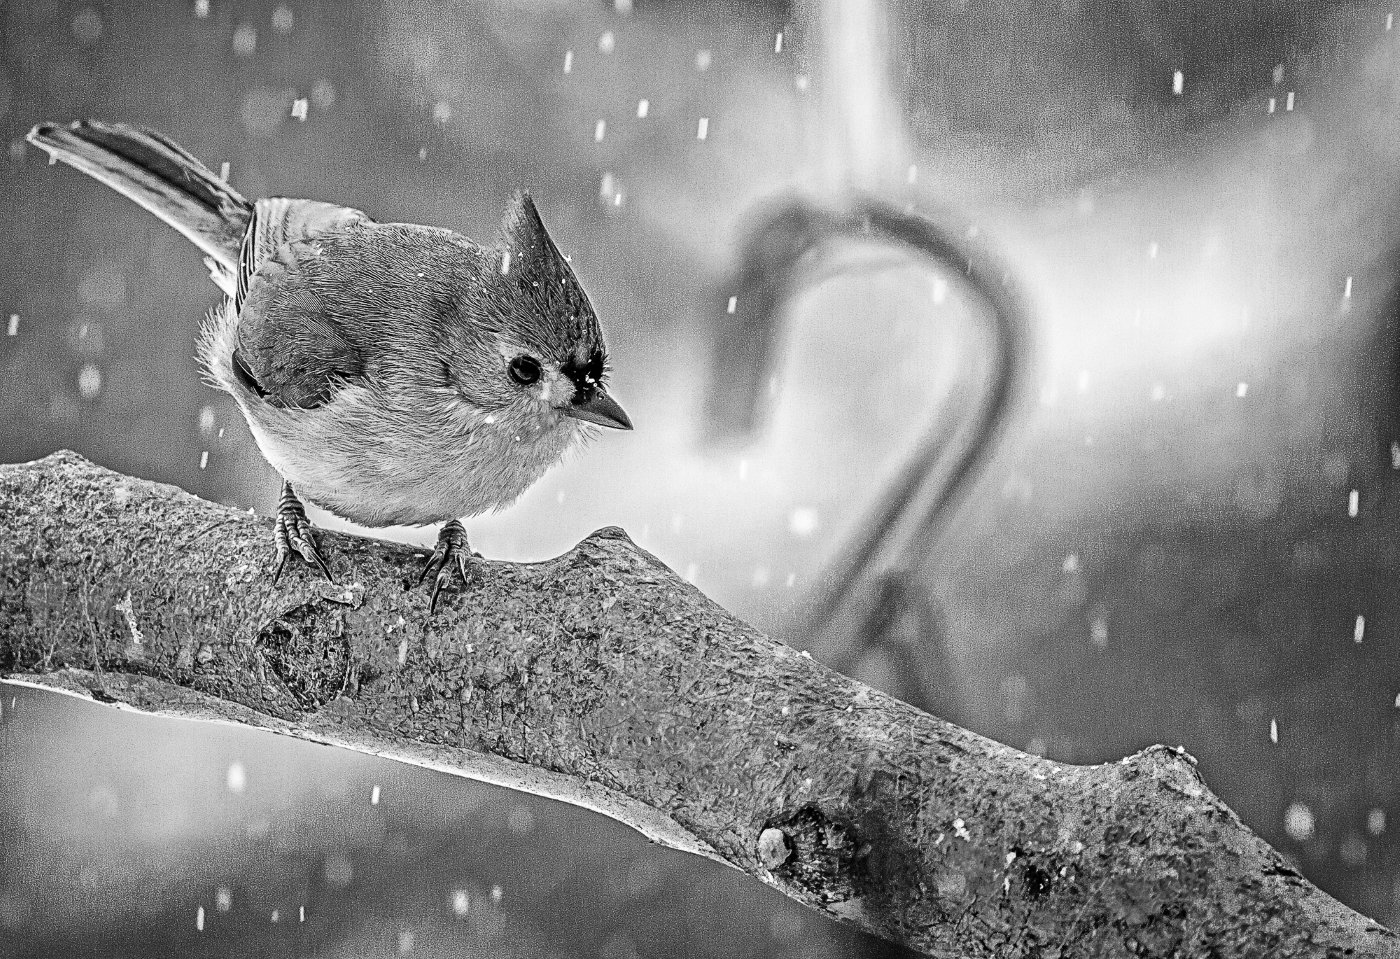 Tufted Titmouse, Ron Varley, Heard Nature Photography Club, 2nd Place